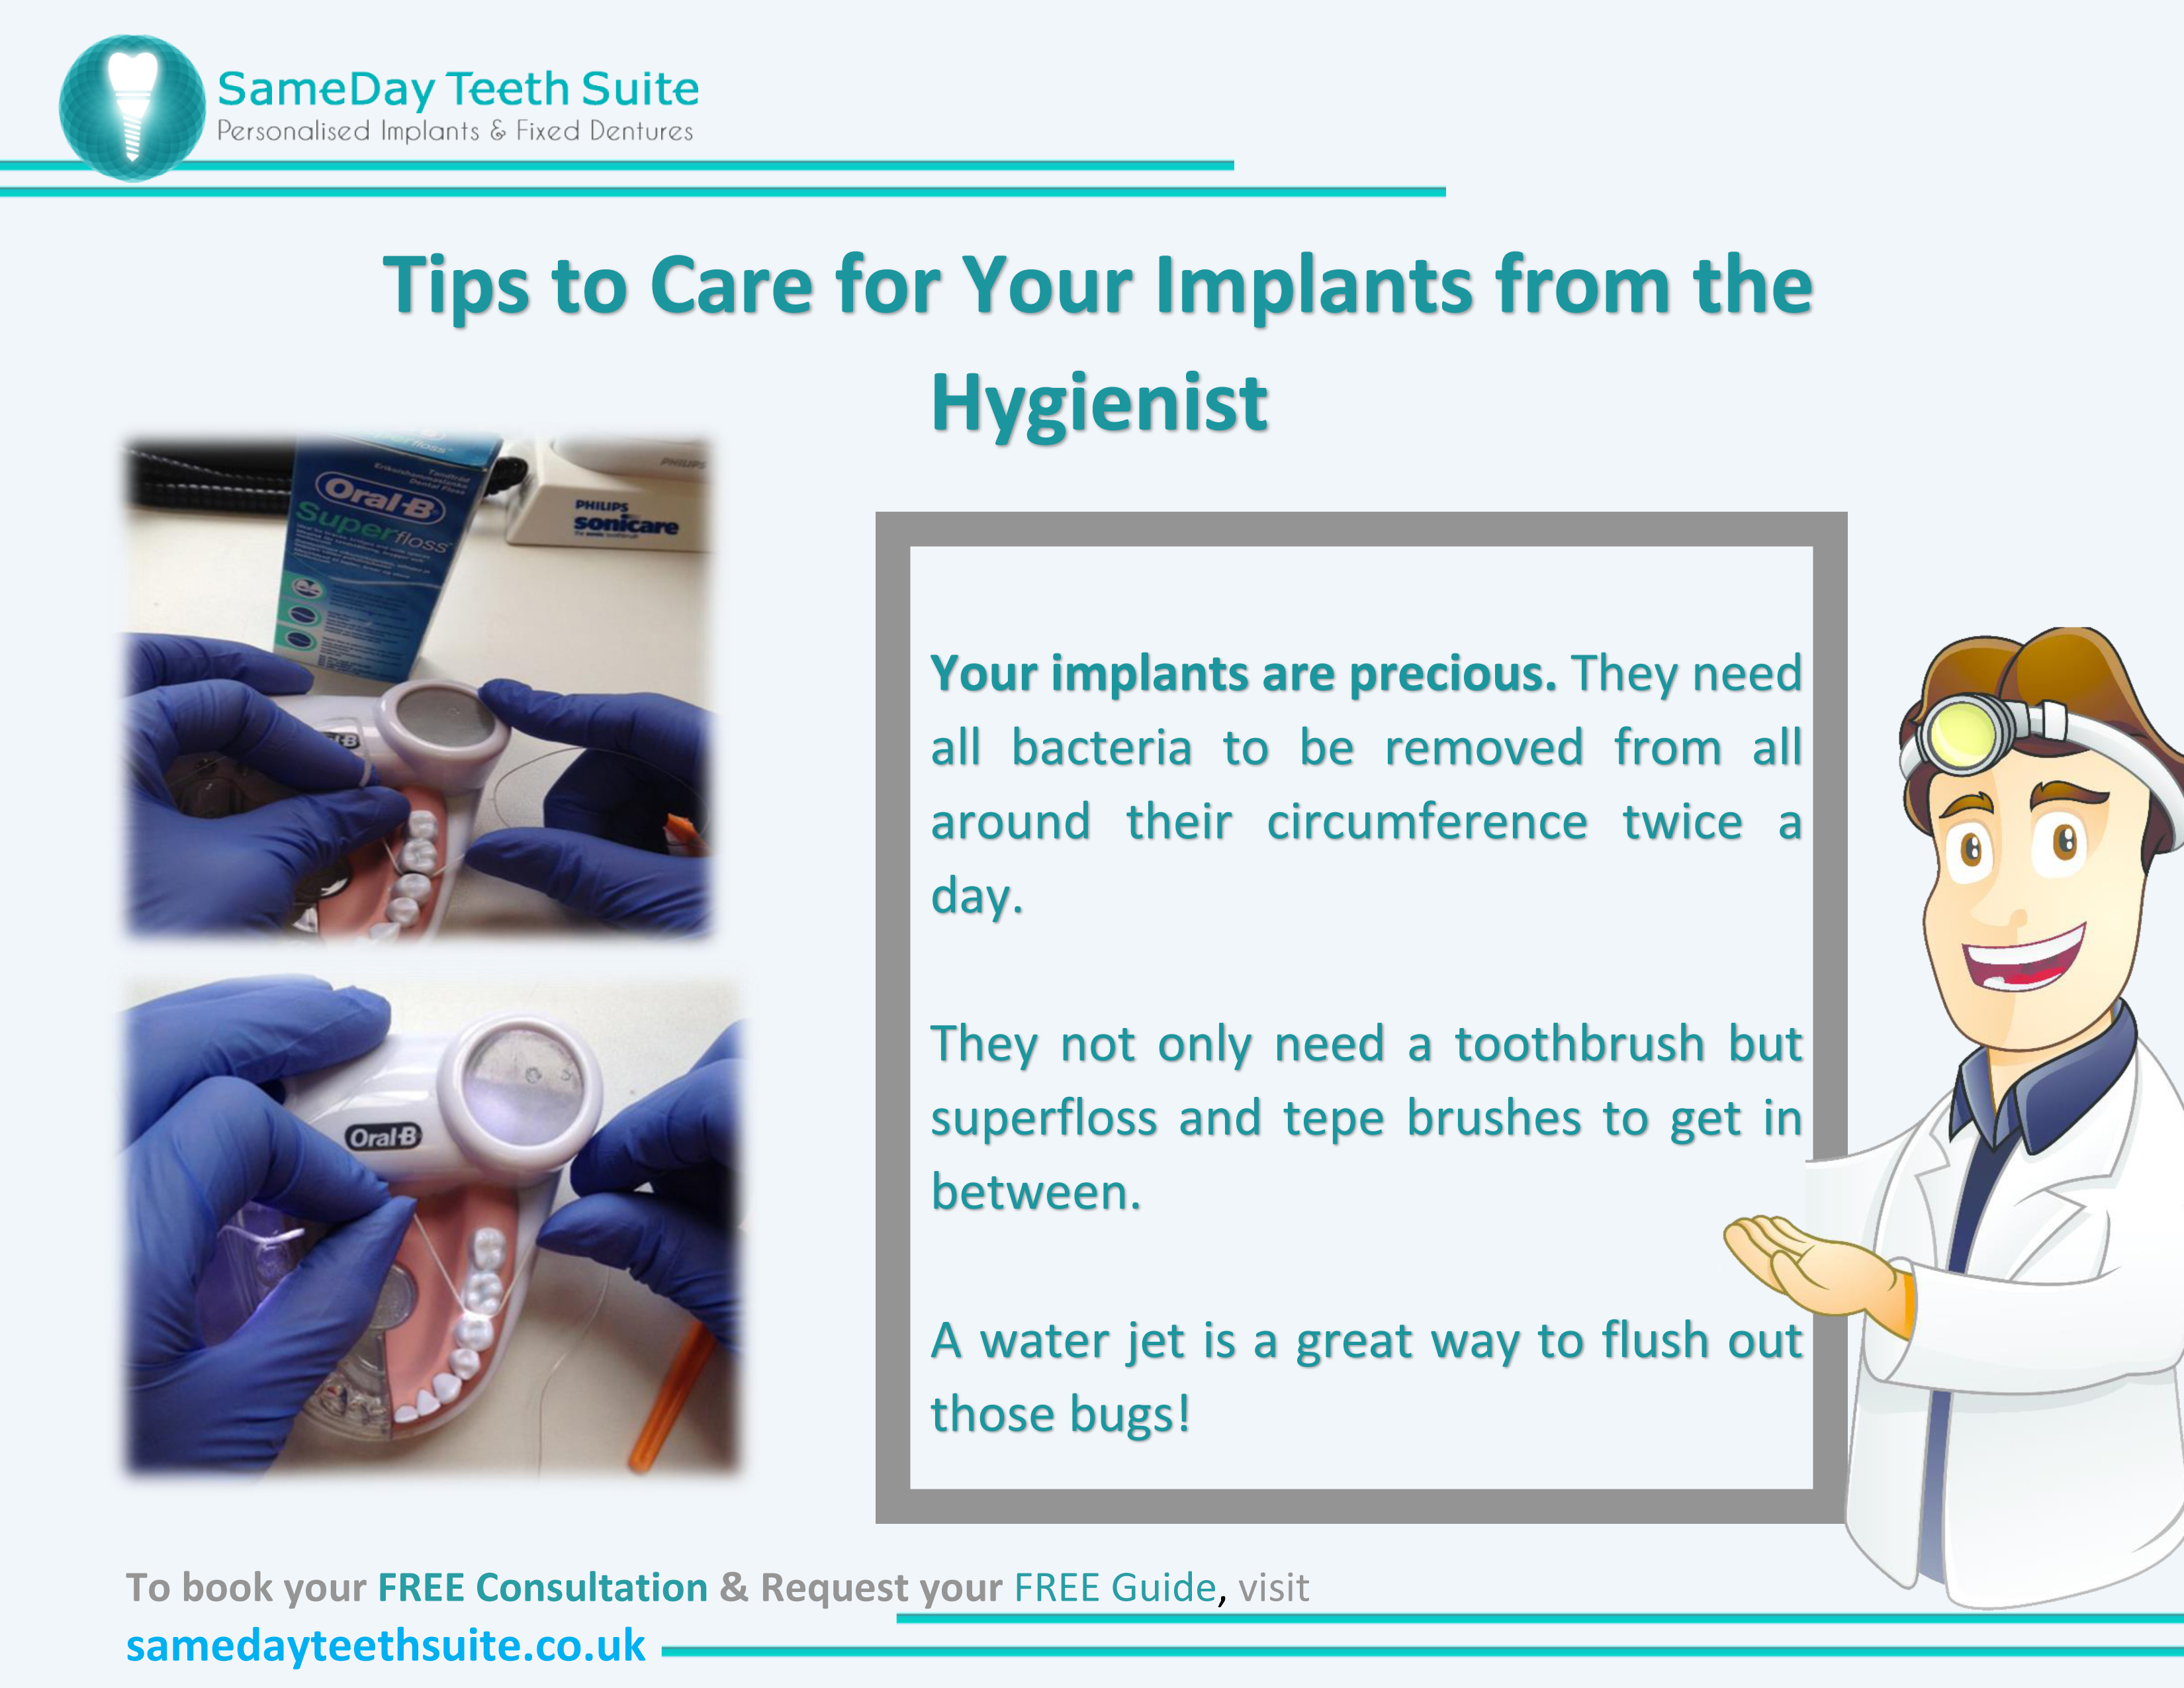 Tips to care for your implants from the hygienist